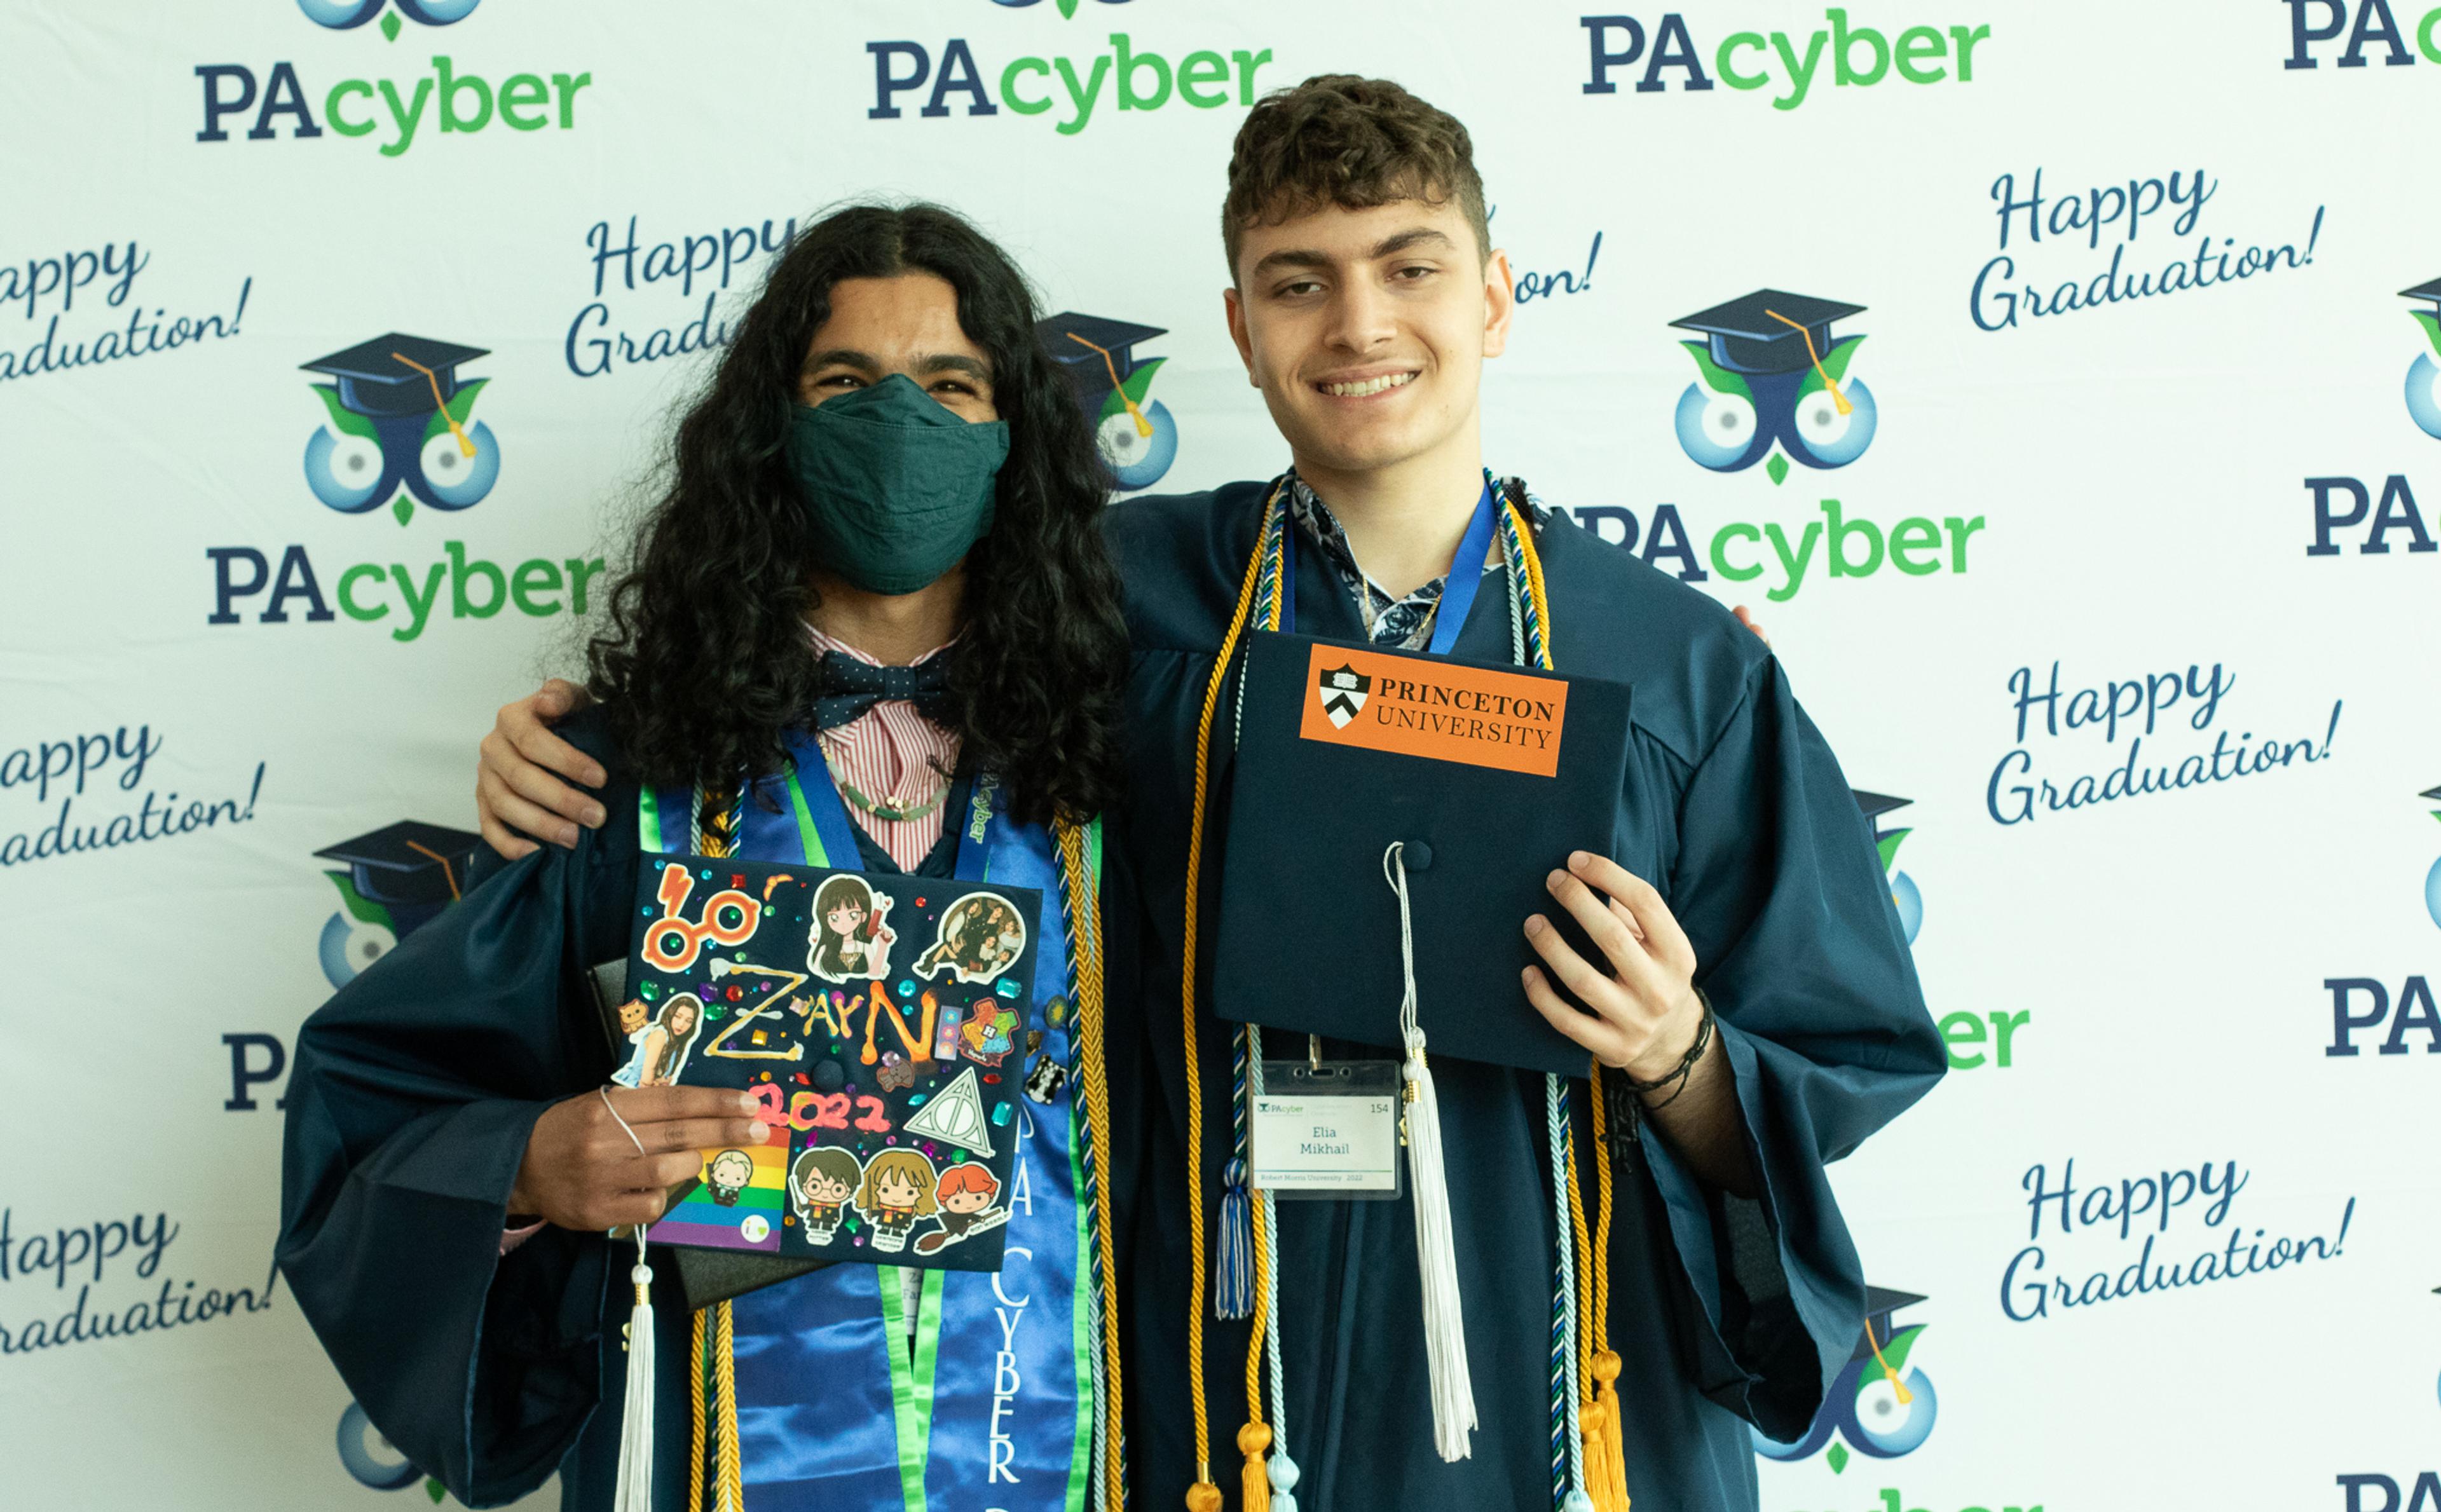 Two students graduating from PA Cyber